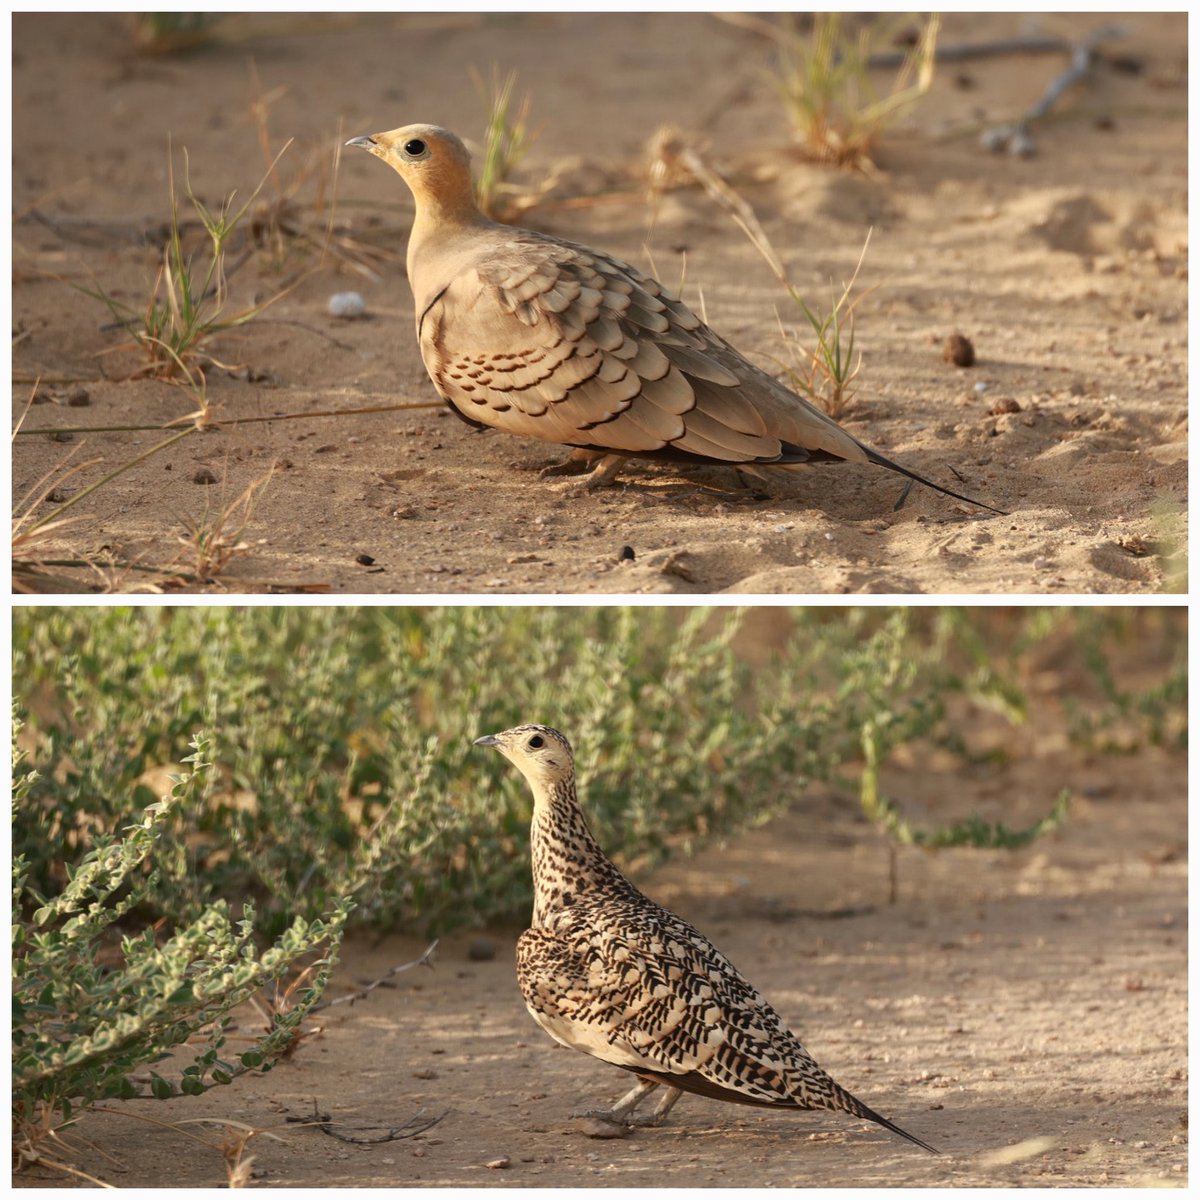 The chestnut-bellied sandgrouse is a bird of barren, semi-deserts & is sexually dimorphic. It feeds on small seeds & is heavily reliant on water, despite living in hot, arid climates and is known to travel up to 80 kms during summer for water. @moefcc @rameshpandeyifs @WWFINDIA